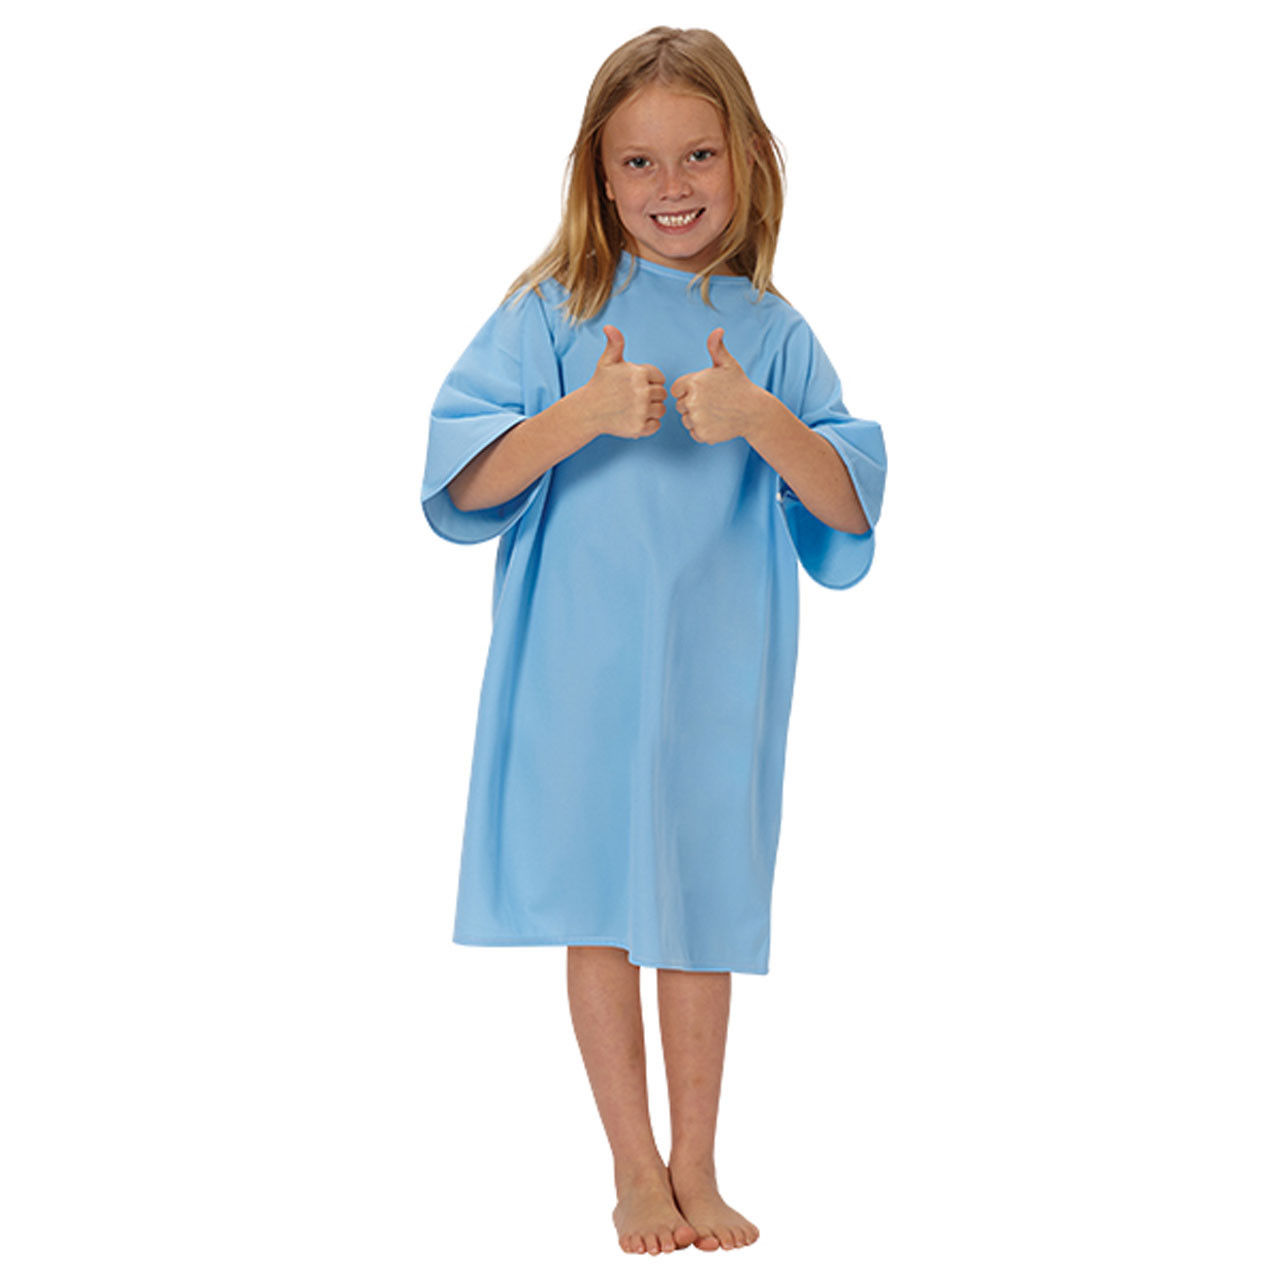 Does the child hospital gown close with buttons or ties?